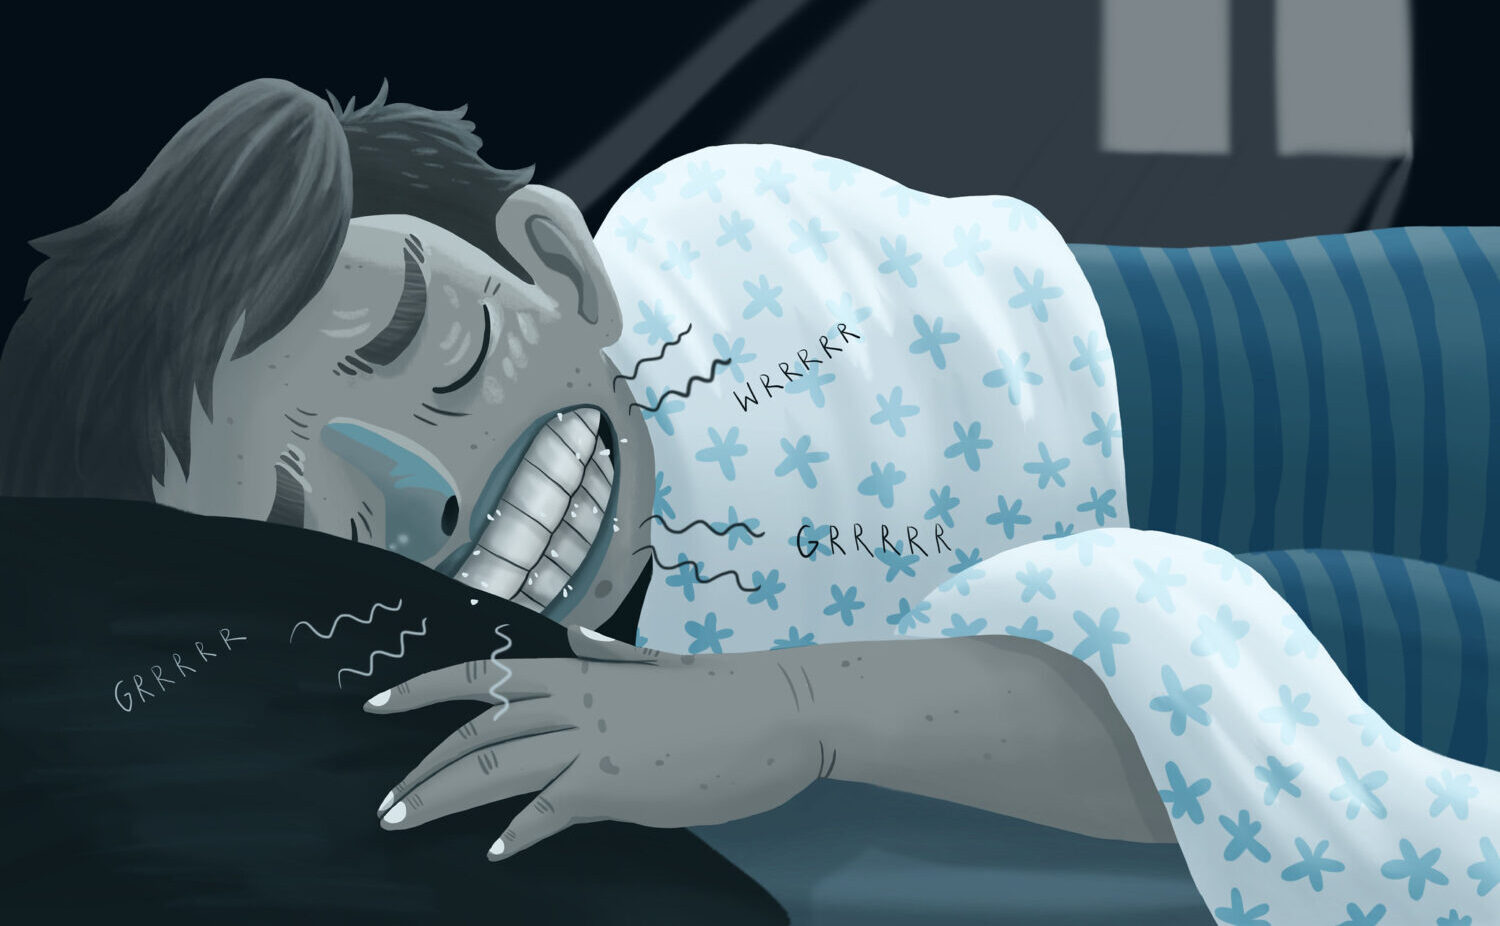 Drawing of a man clenching and grinding his teeth as he sleeps